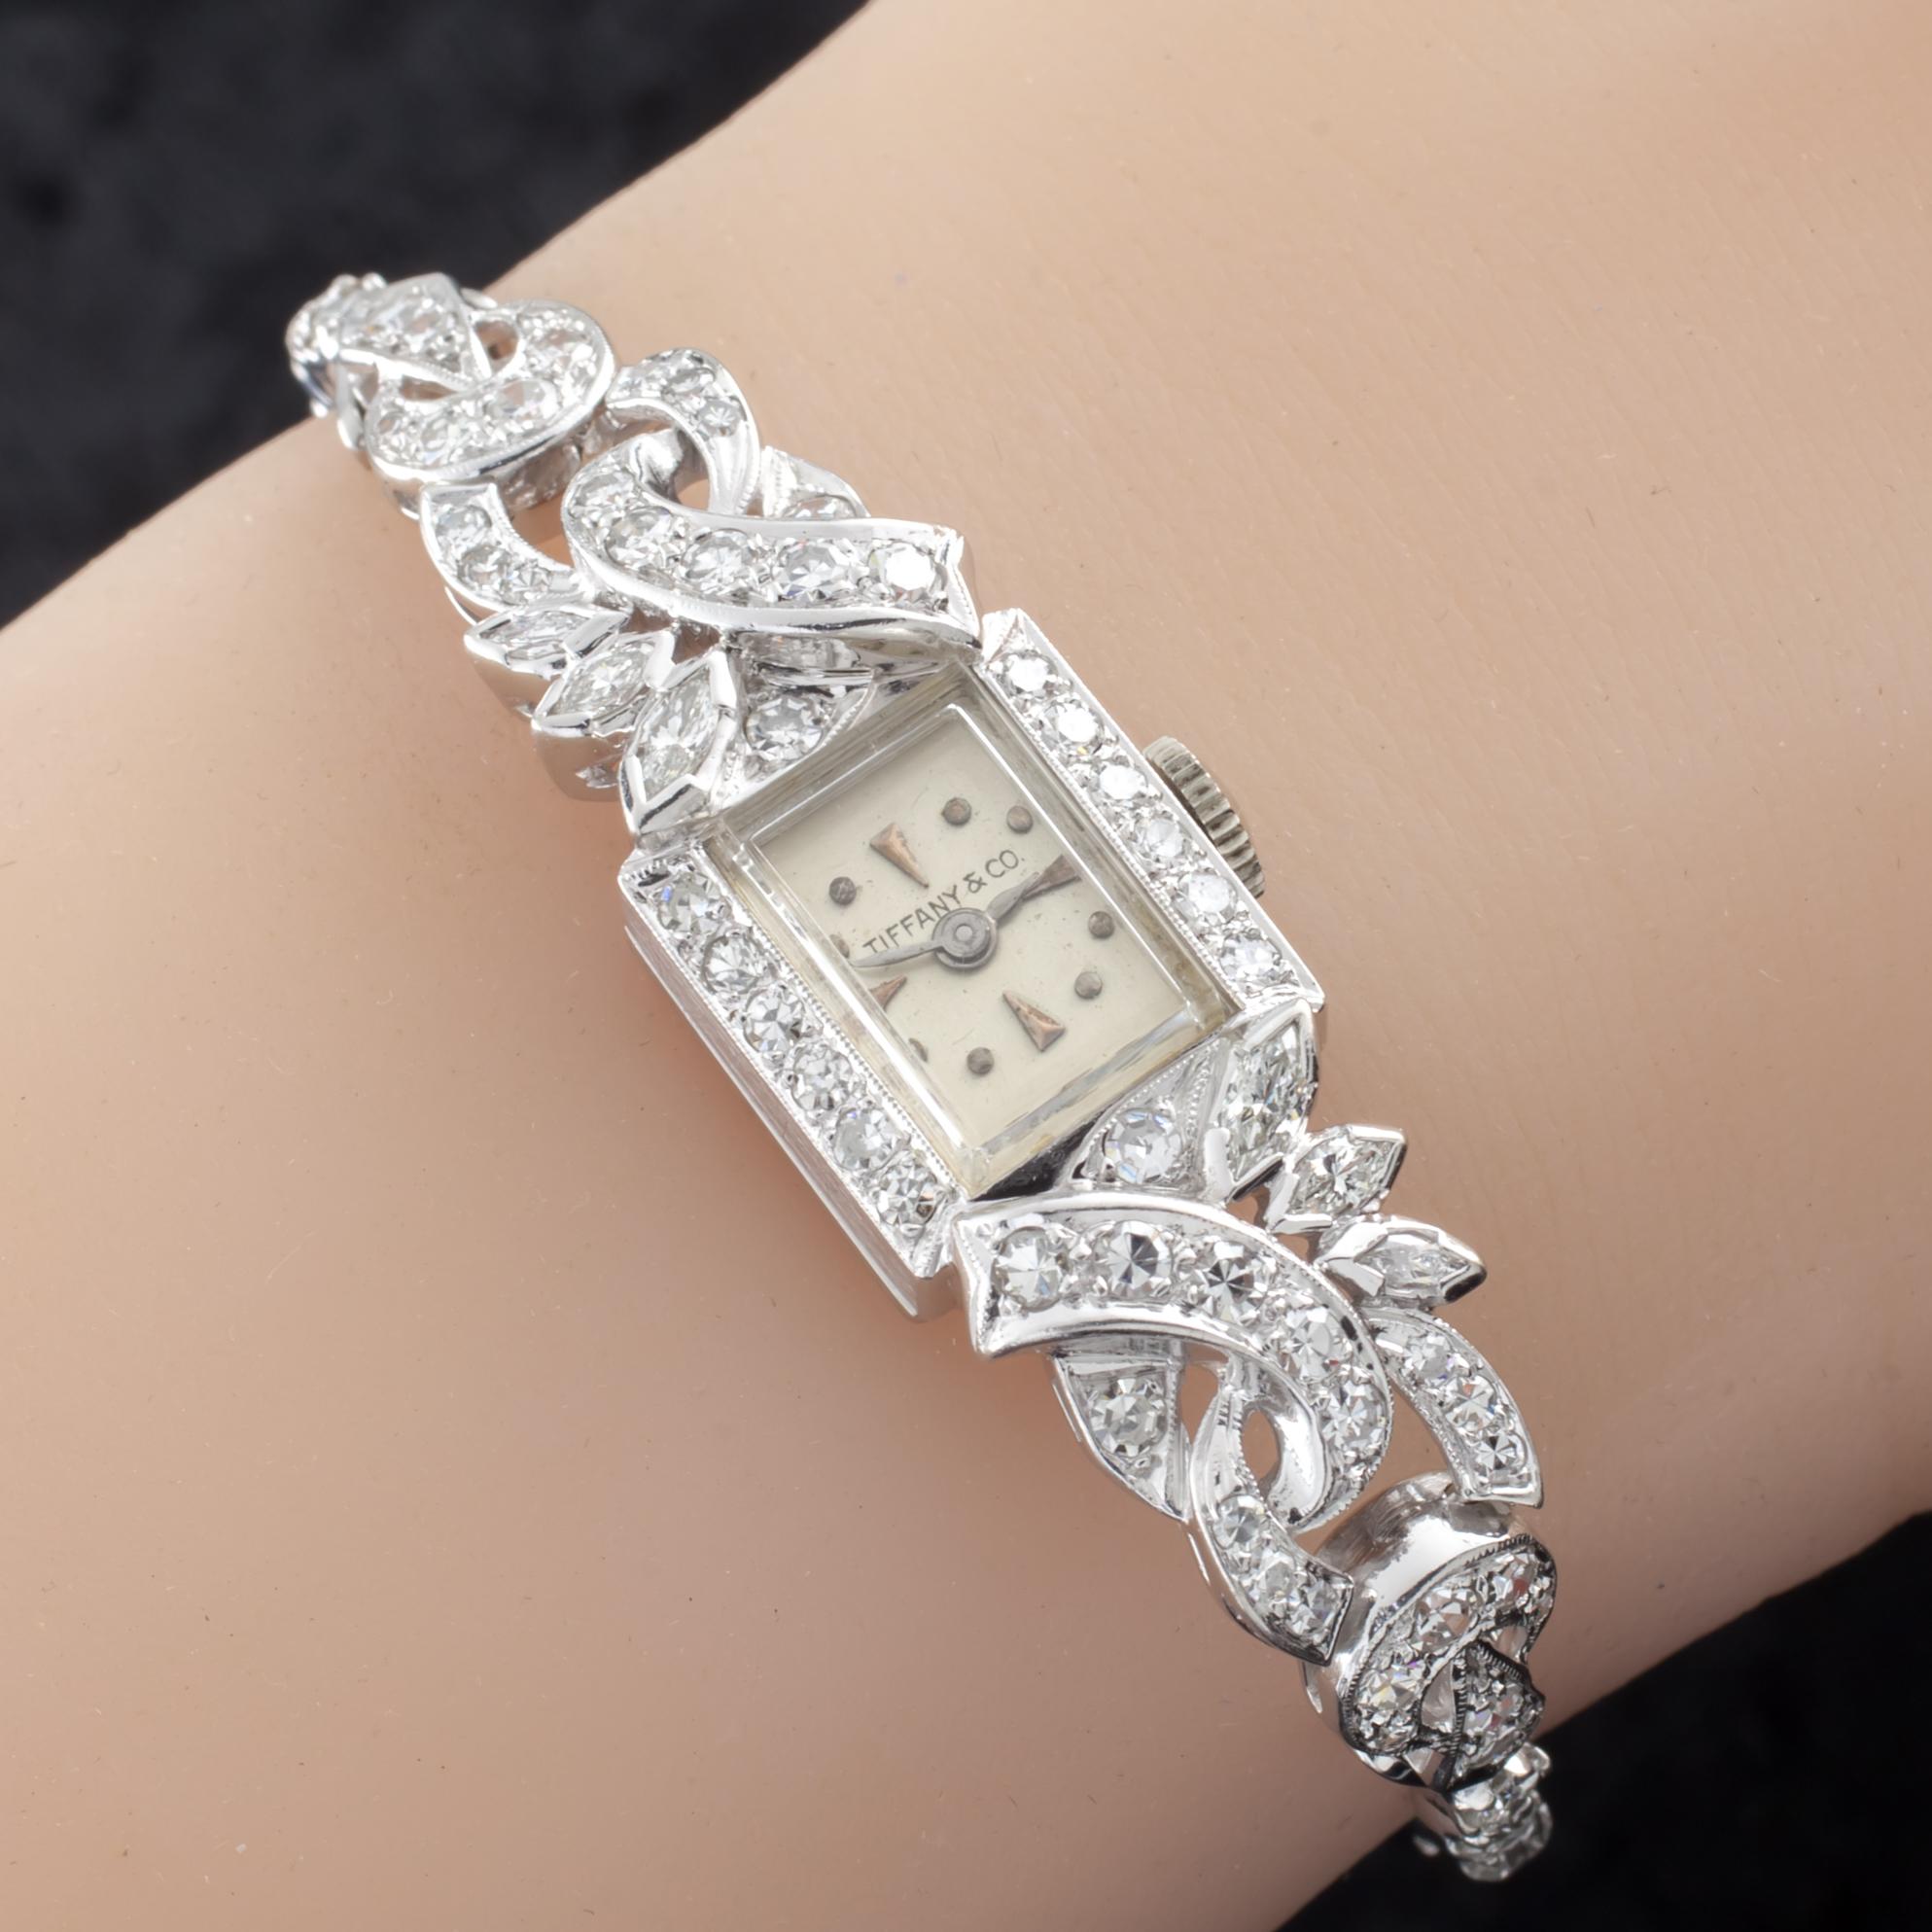 Includes 17-Jewel Hilton Watch Co. Hand-Winding Movement
Total Diamond Weight = Appx 5 carats
Average Color = G
Average Clarity = VS
14k White Gold Case
14 mm Wide (15 mm w/ Crown)
Lug-to-Lug Distance = 4 mm
Lug-to-Lug Length = 43 mm
Thickness = 9